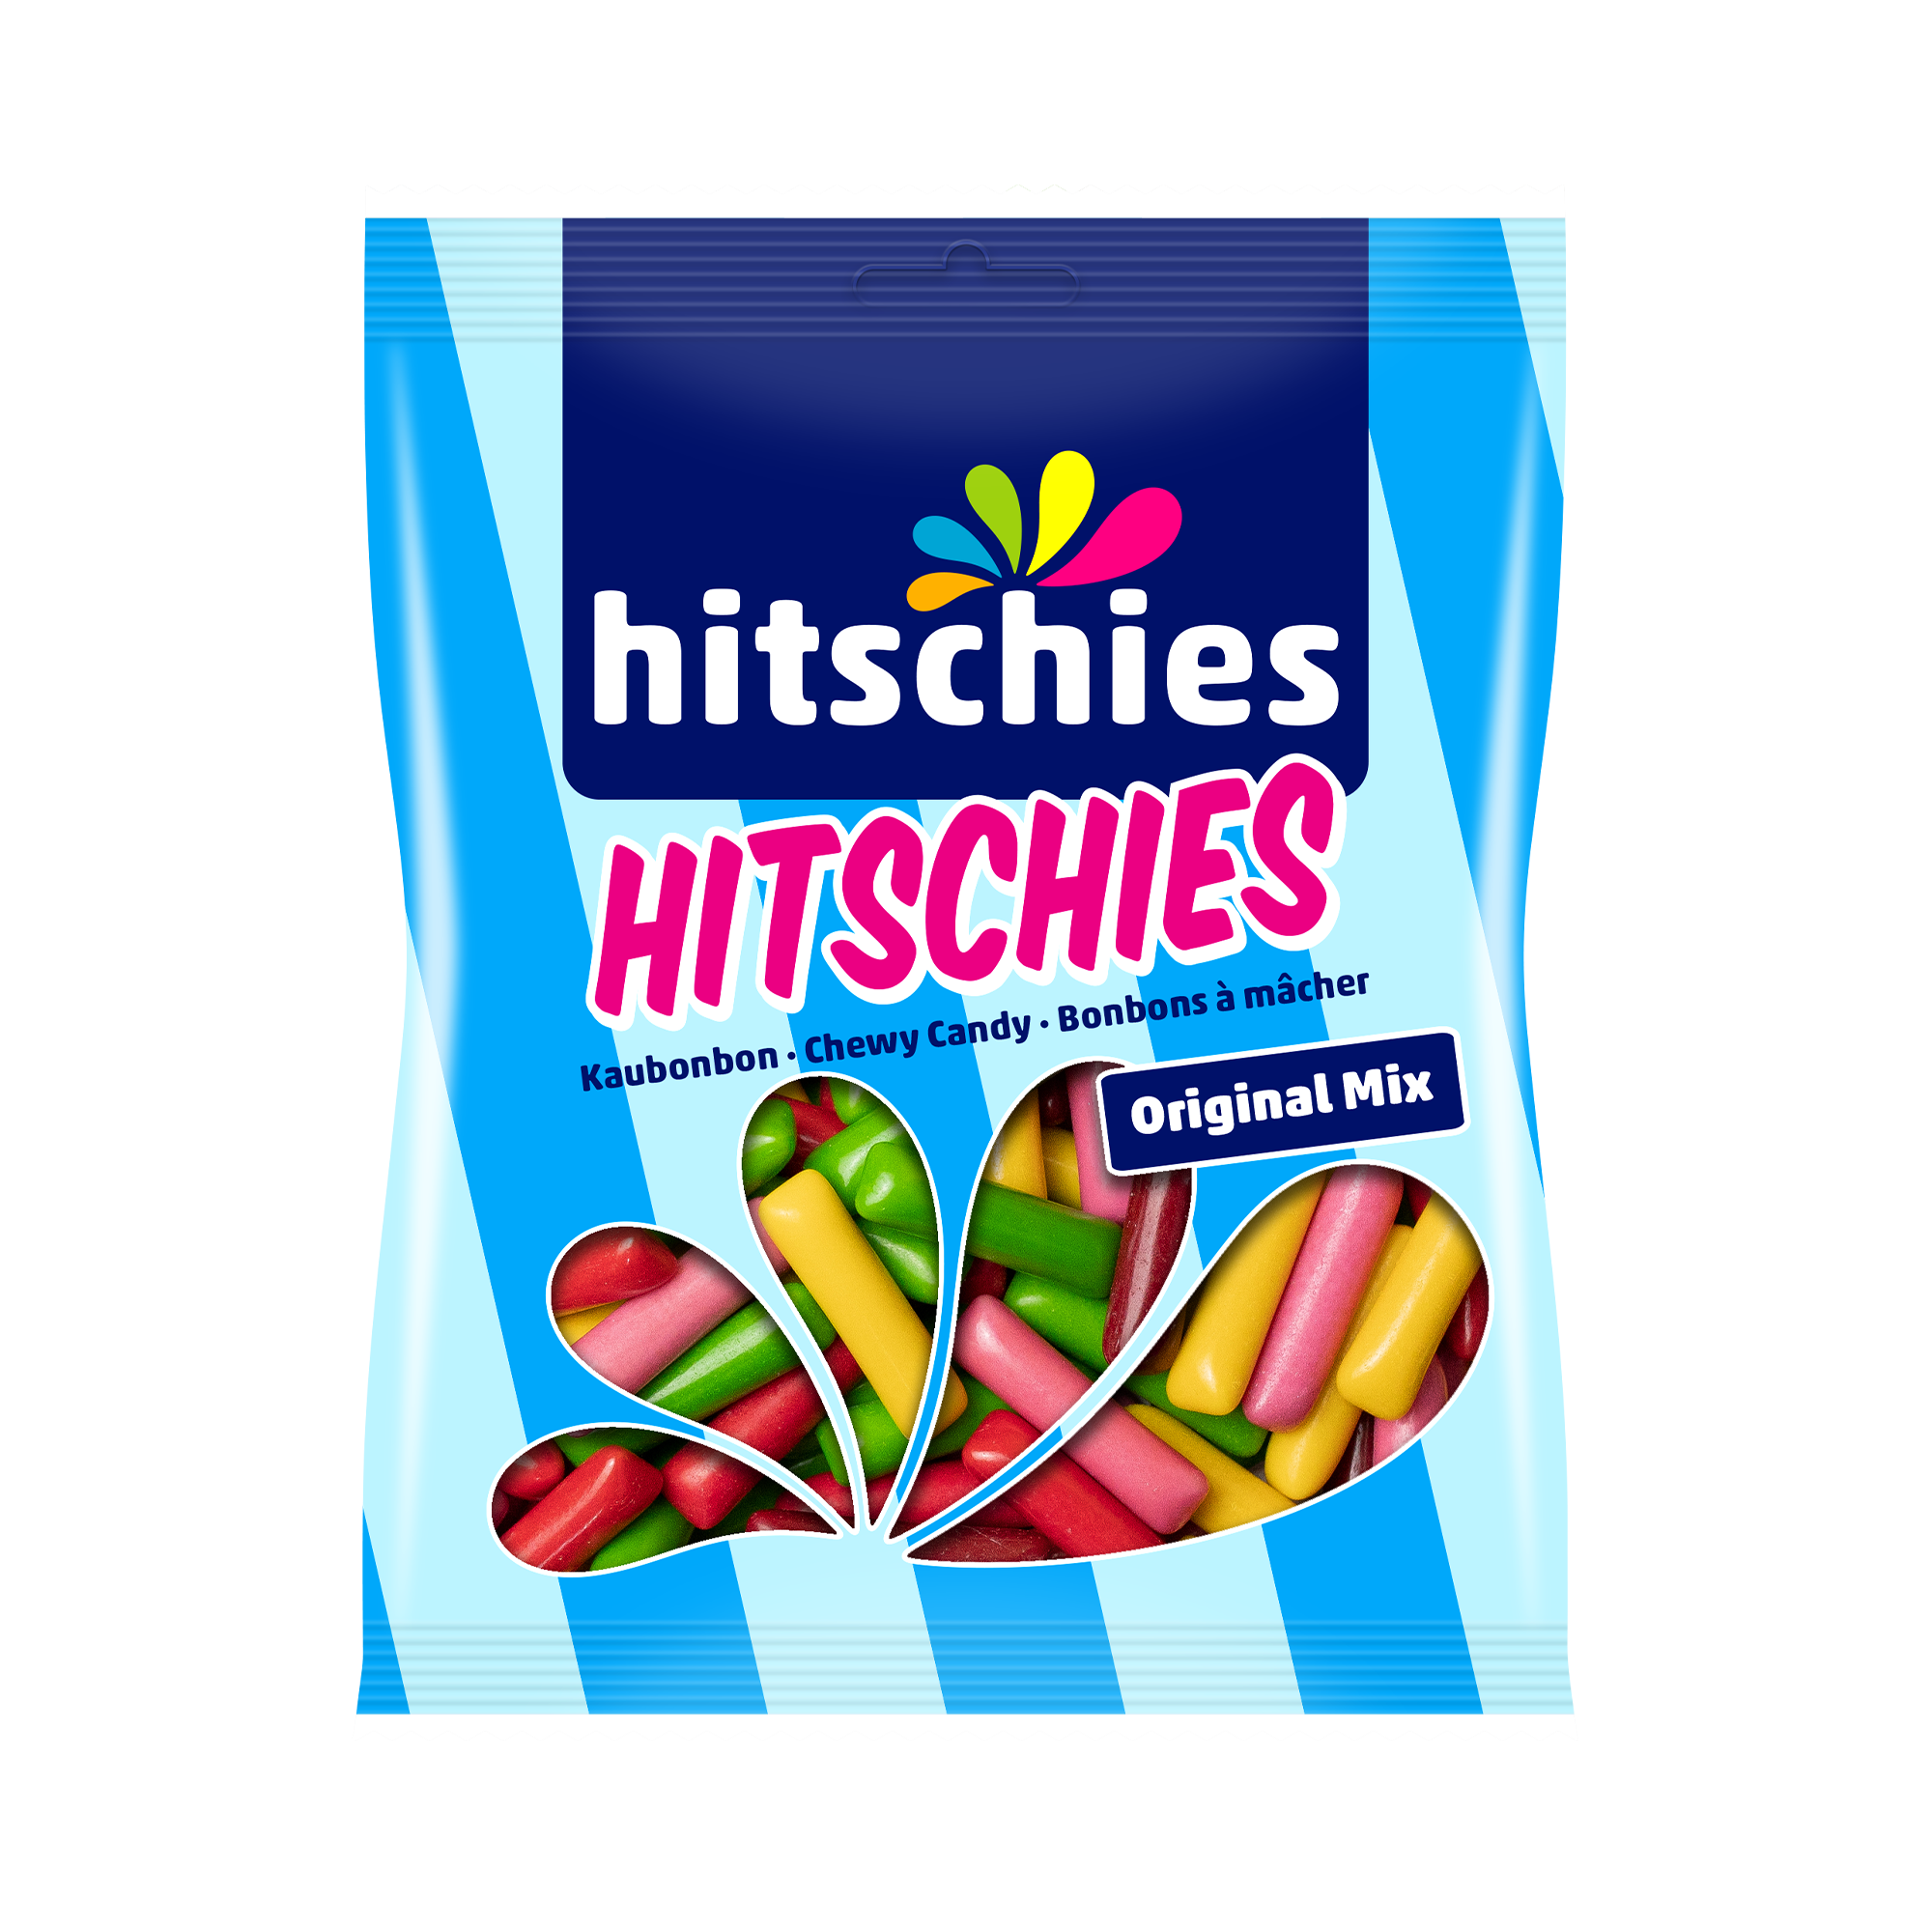 Hitschler Hitschies ORIGINAL Made in Germany! 5 Bags 750gr TOTAL FREE  SHIPPING